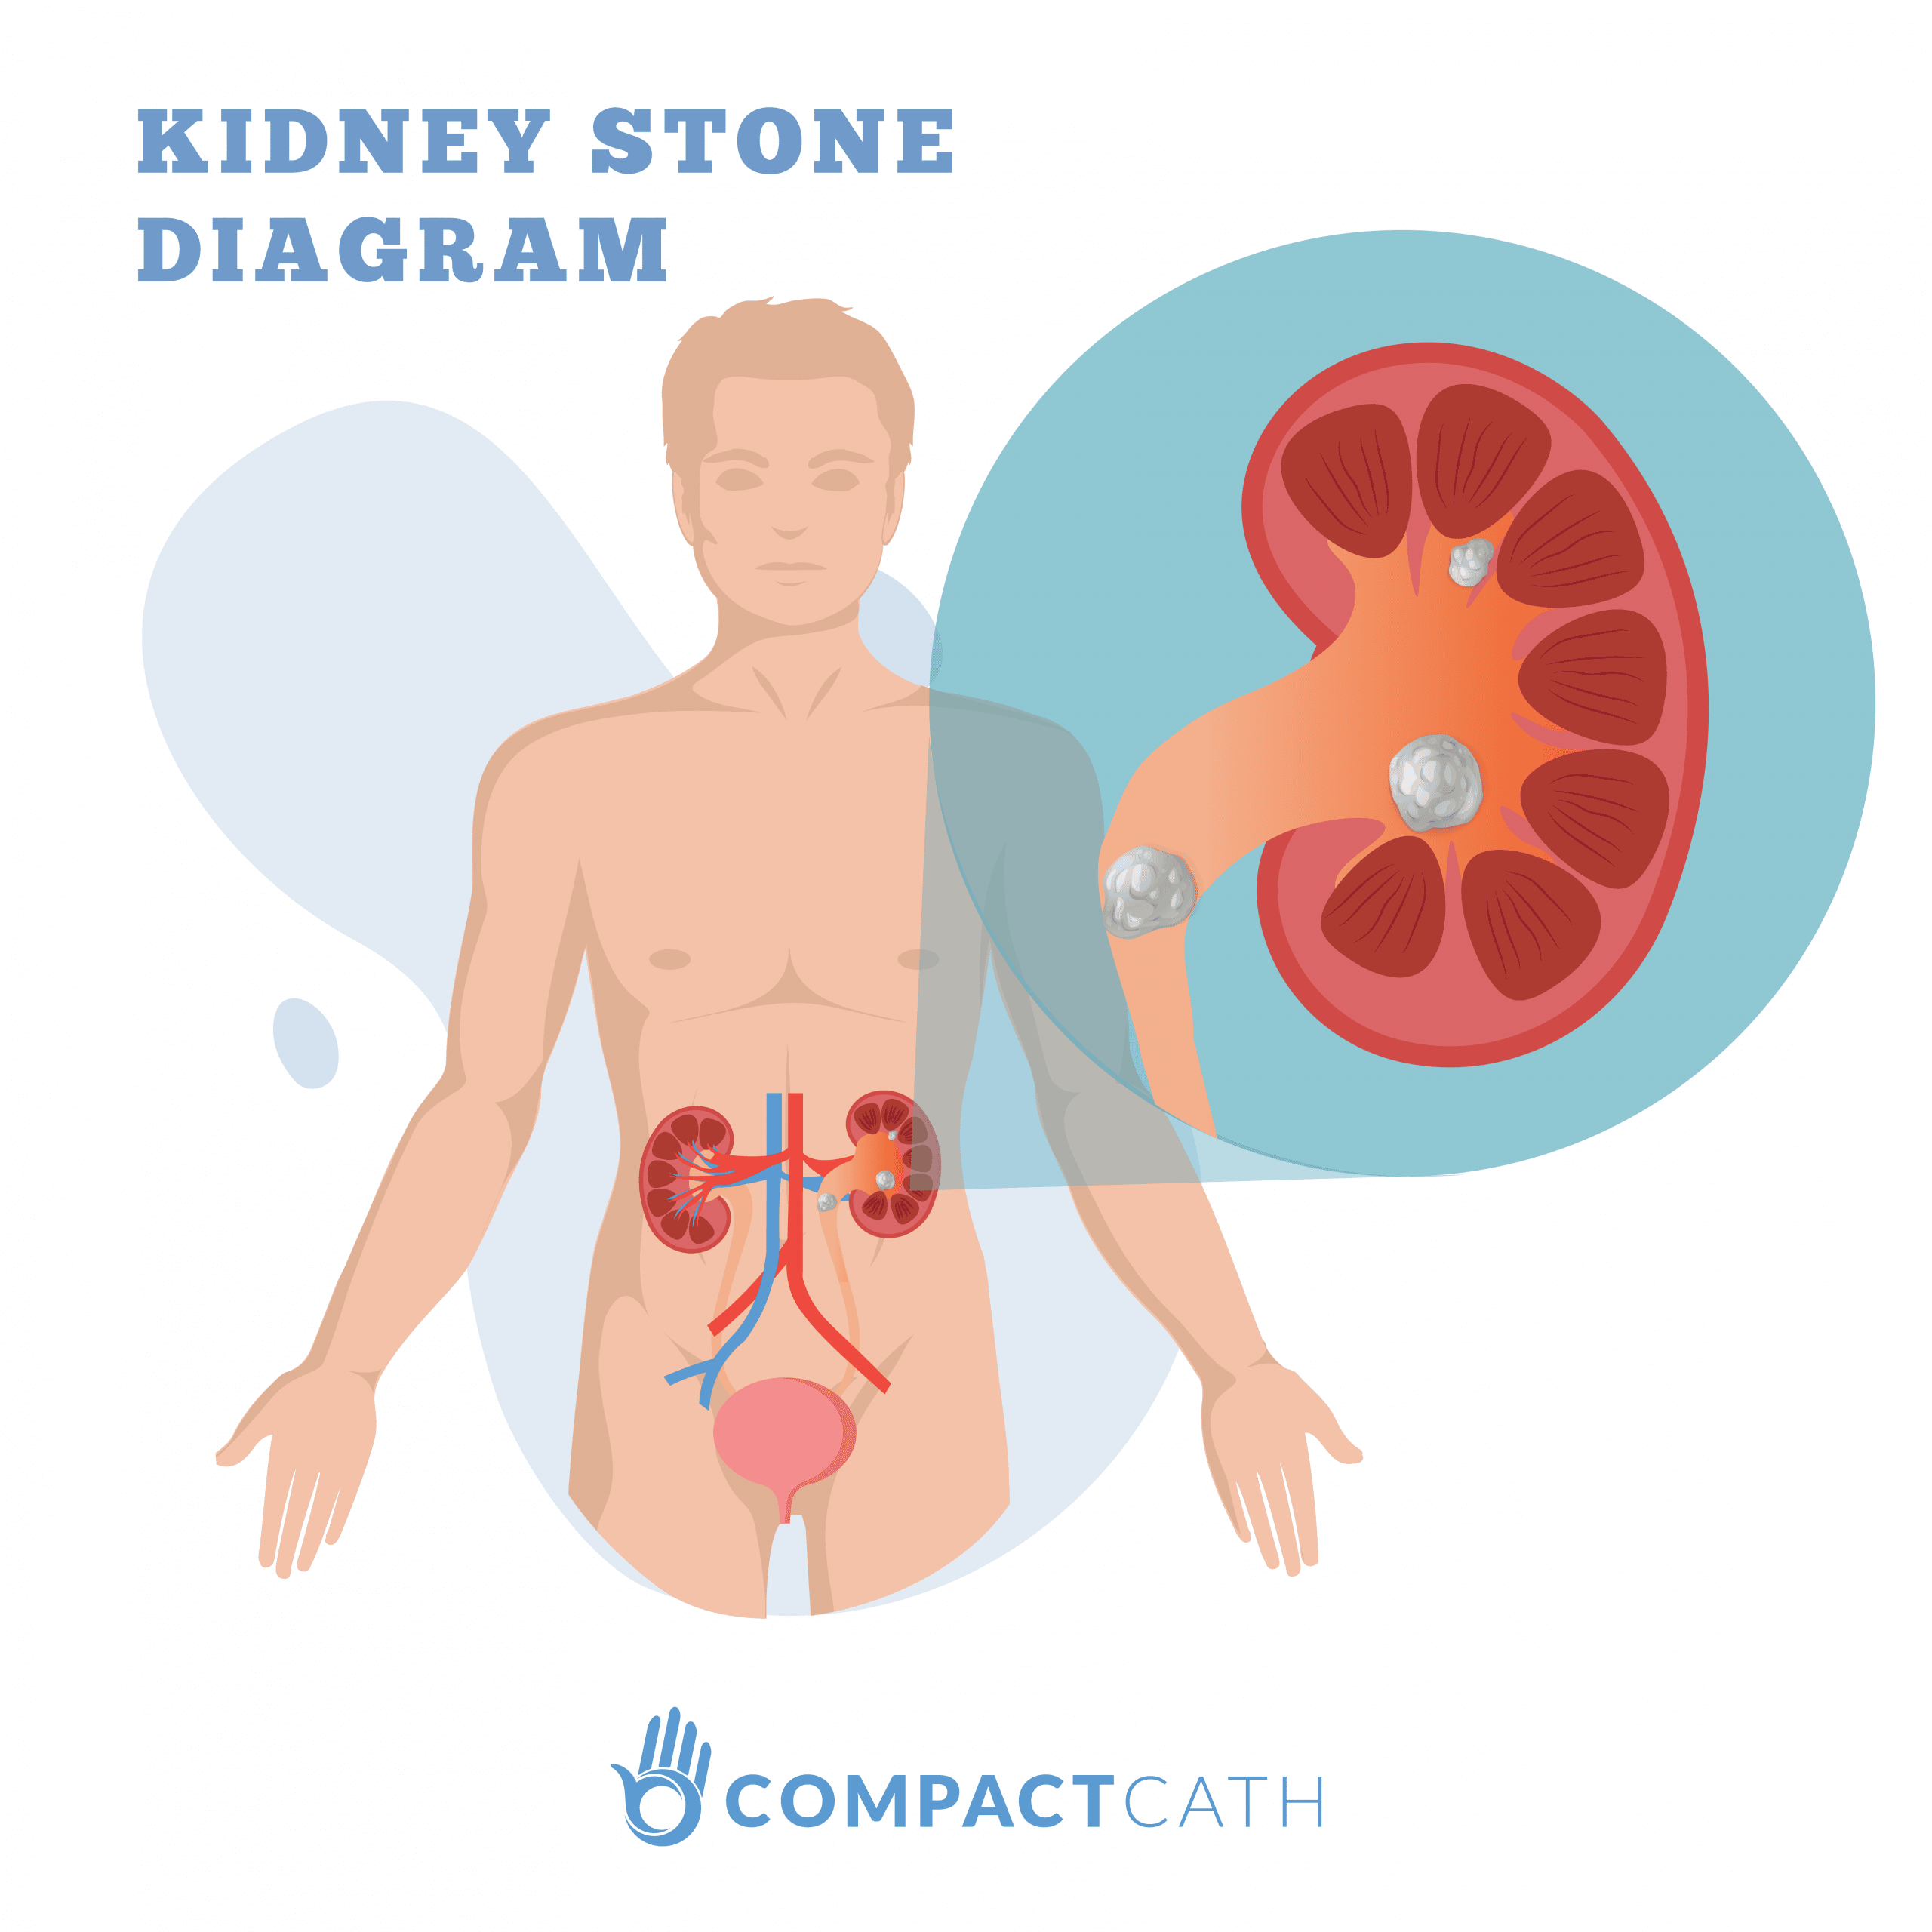 Kidney Stones: The Ultimate Beginnerâs Guide